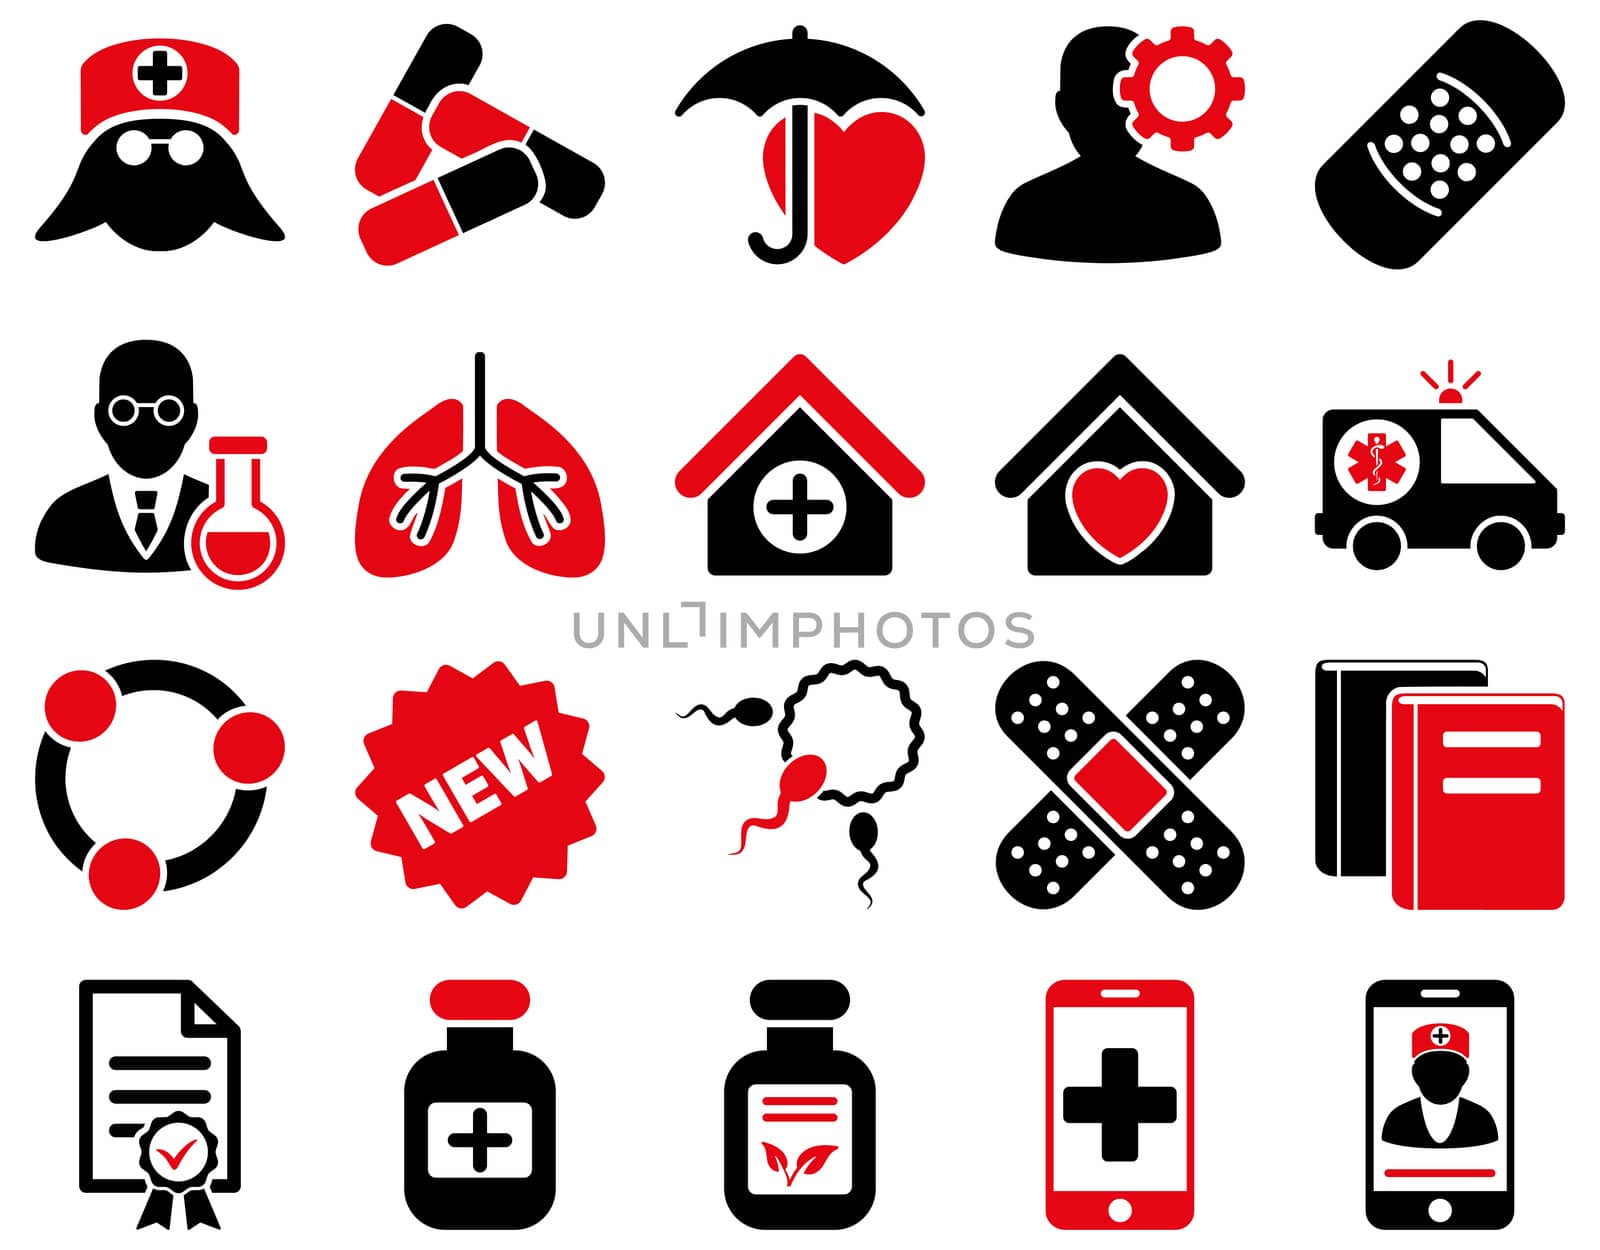 Medical icon set. Style: bicolor icons drawn with intensive red and black colors on a white background.